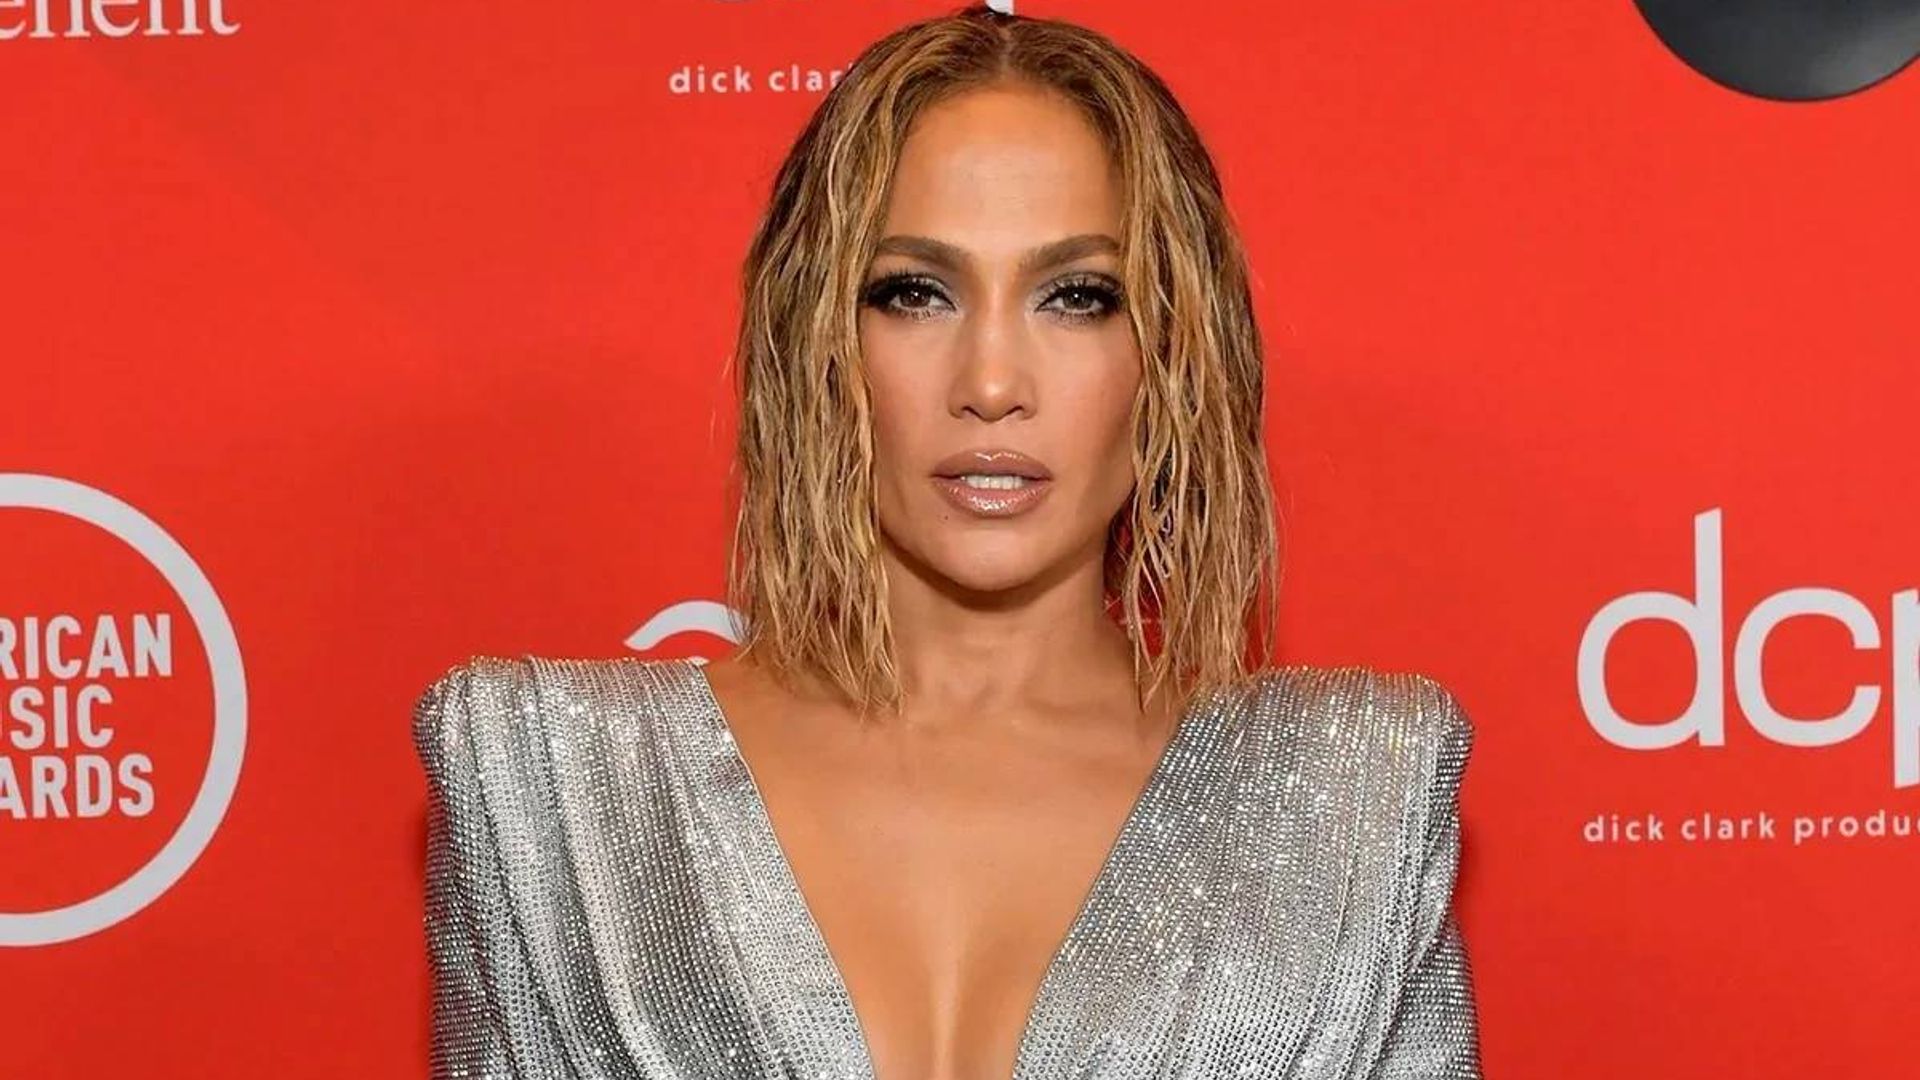 Jennifer Lopez's glam date night look is next level gorgeous